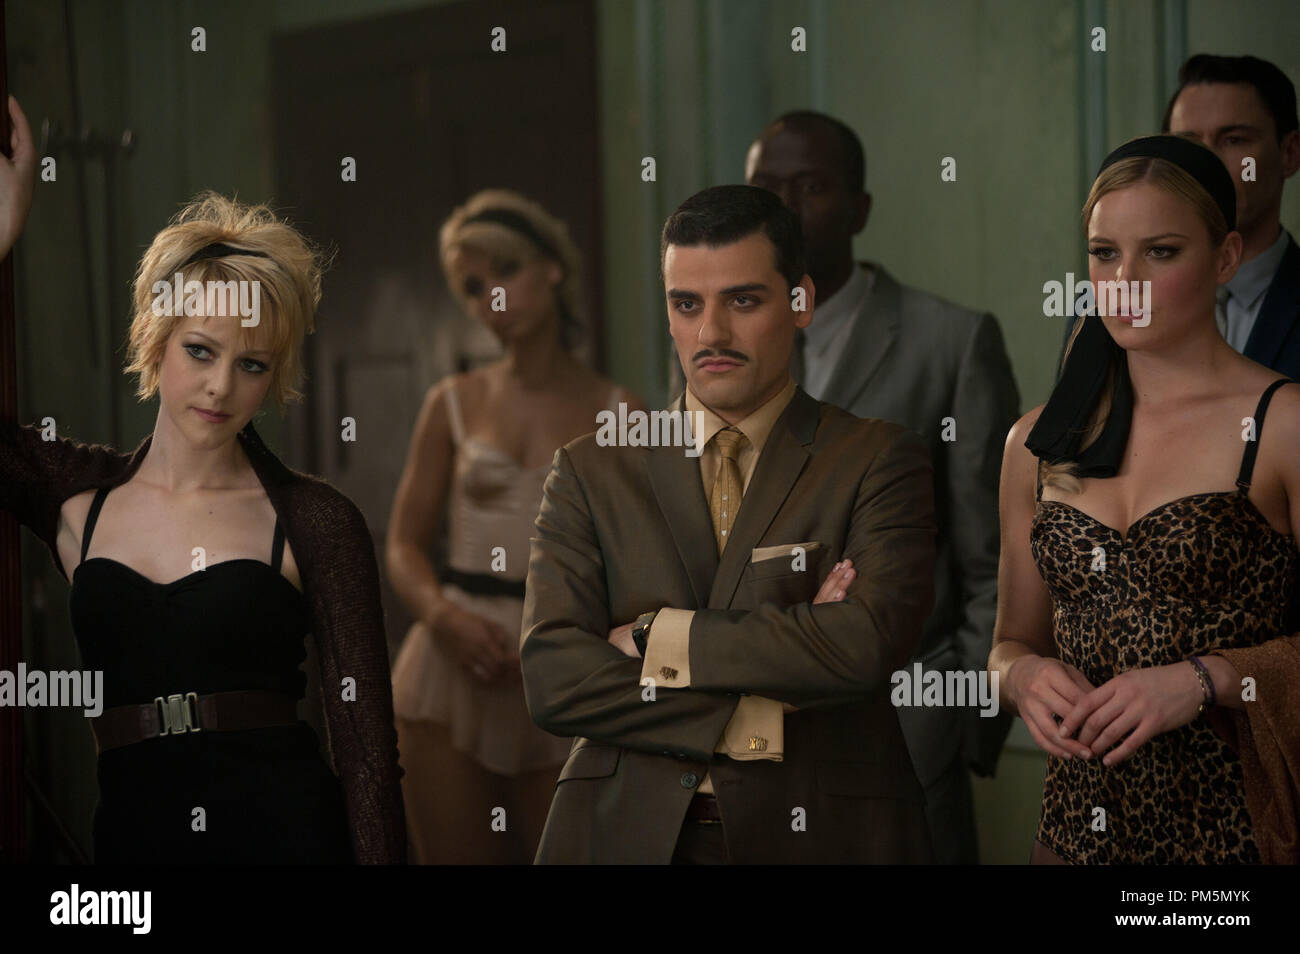 (Front row l-r) JENA MALONE as Rocket, OSCAR ISAAC as Blue Jones and ABBIE CORNISH as Sweet Pea in Warner Bros. Pictures’ and Legendary Pictures’ epic action fantasy “SUCKER PUNCH,” a Warner Bros. Pictures release. Stock Photo